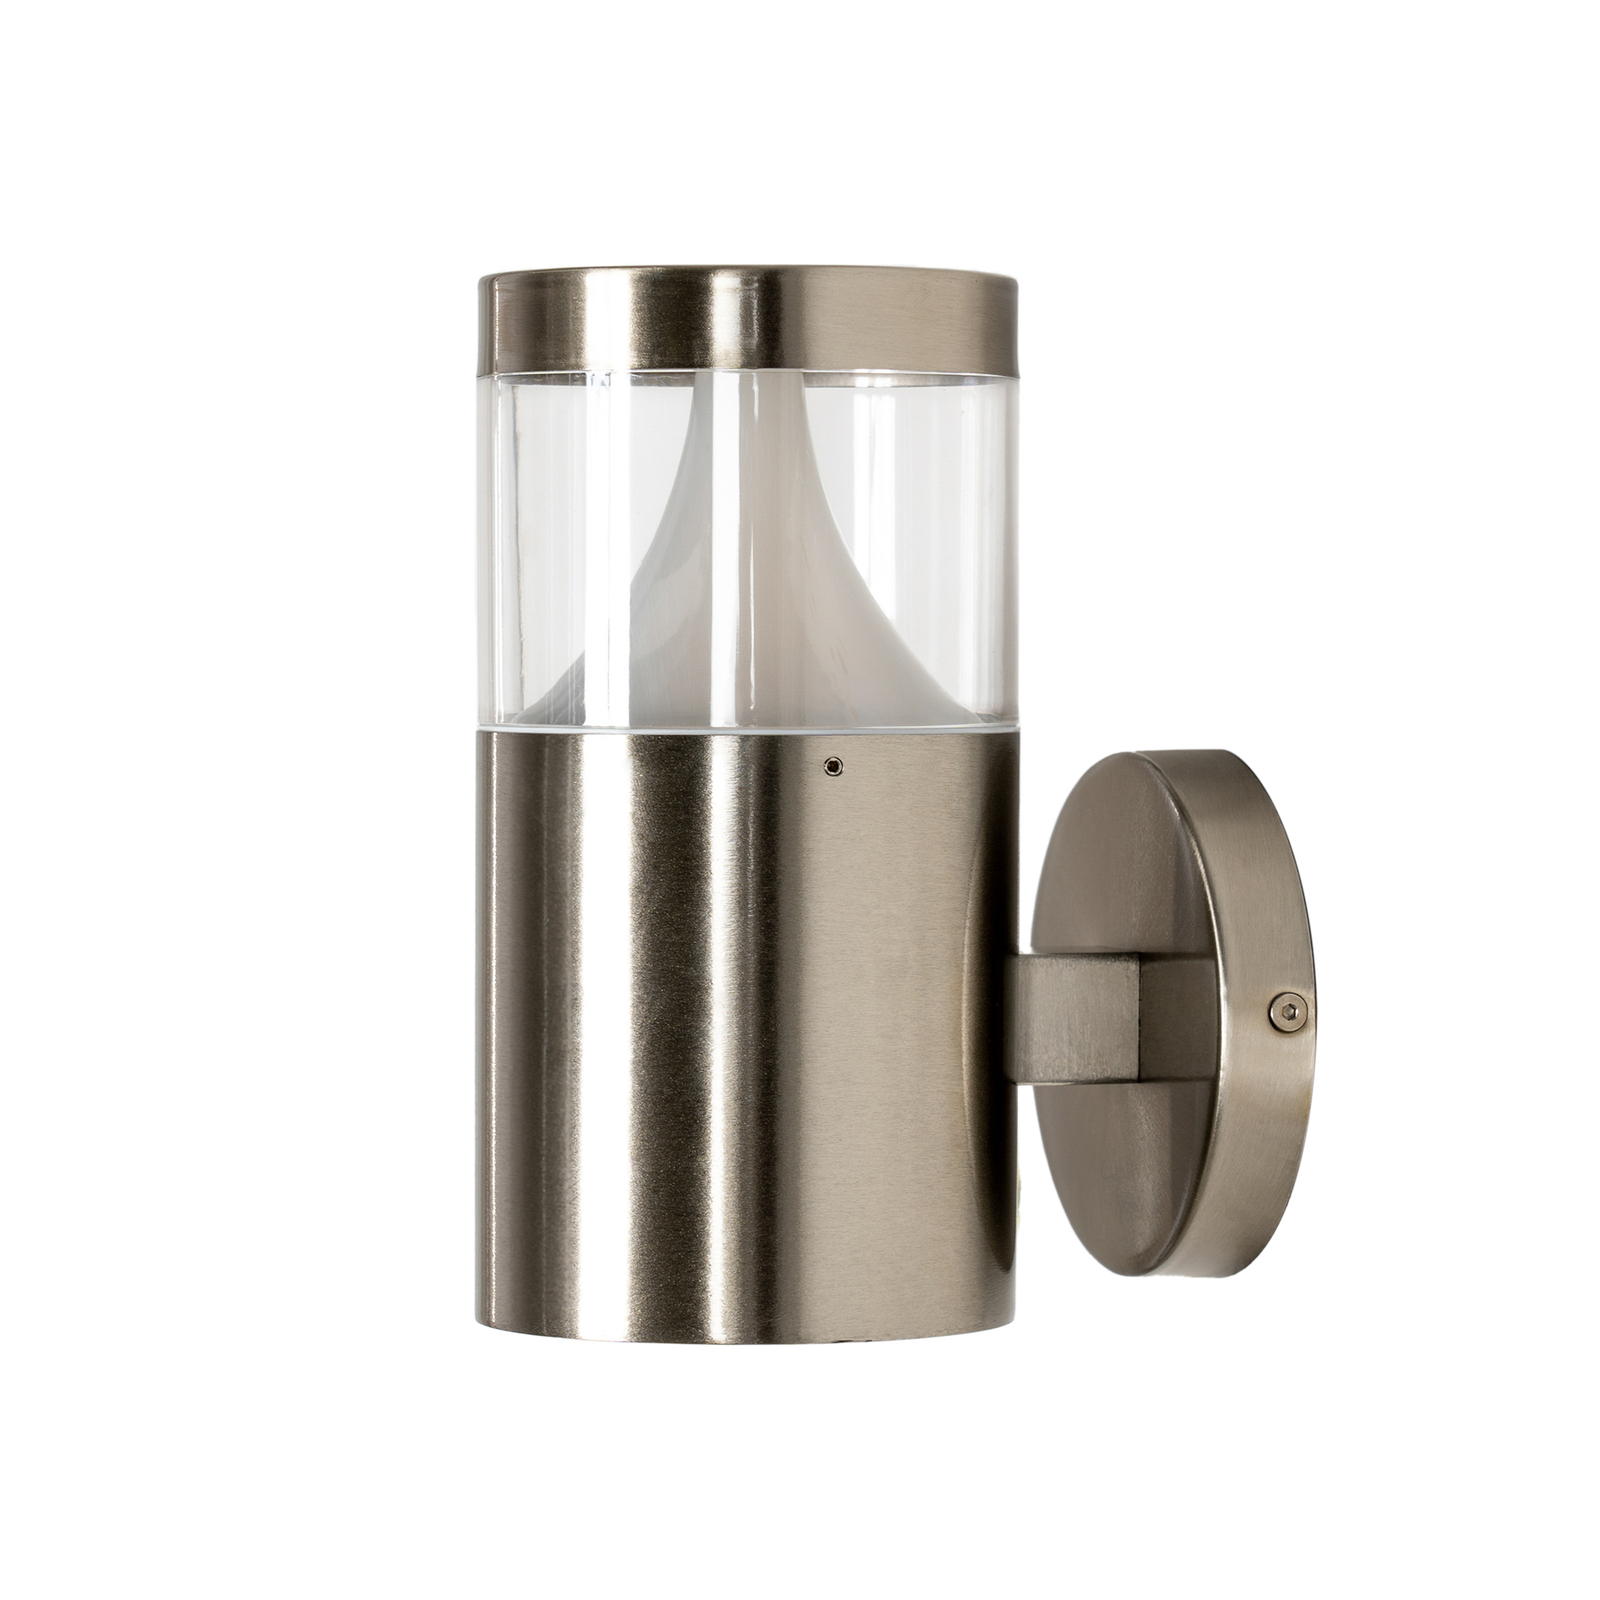 Arcchio Rudolfine outdoor wall light, V4A stainless steel